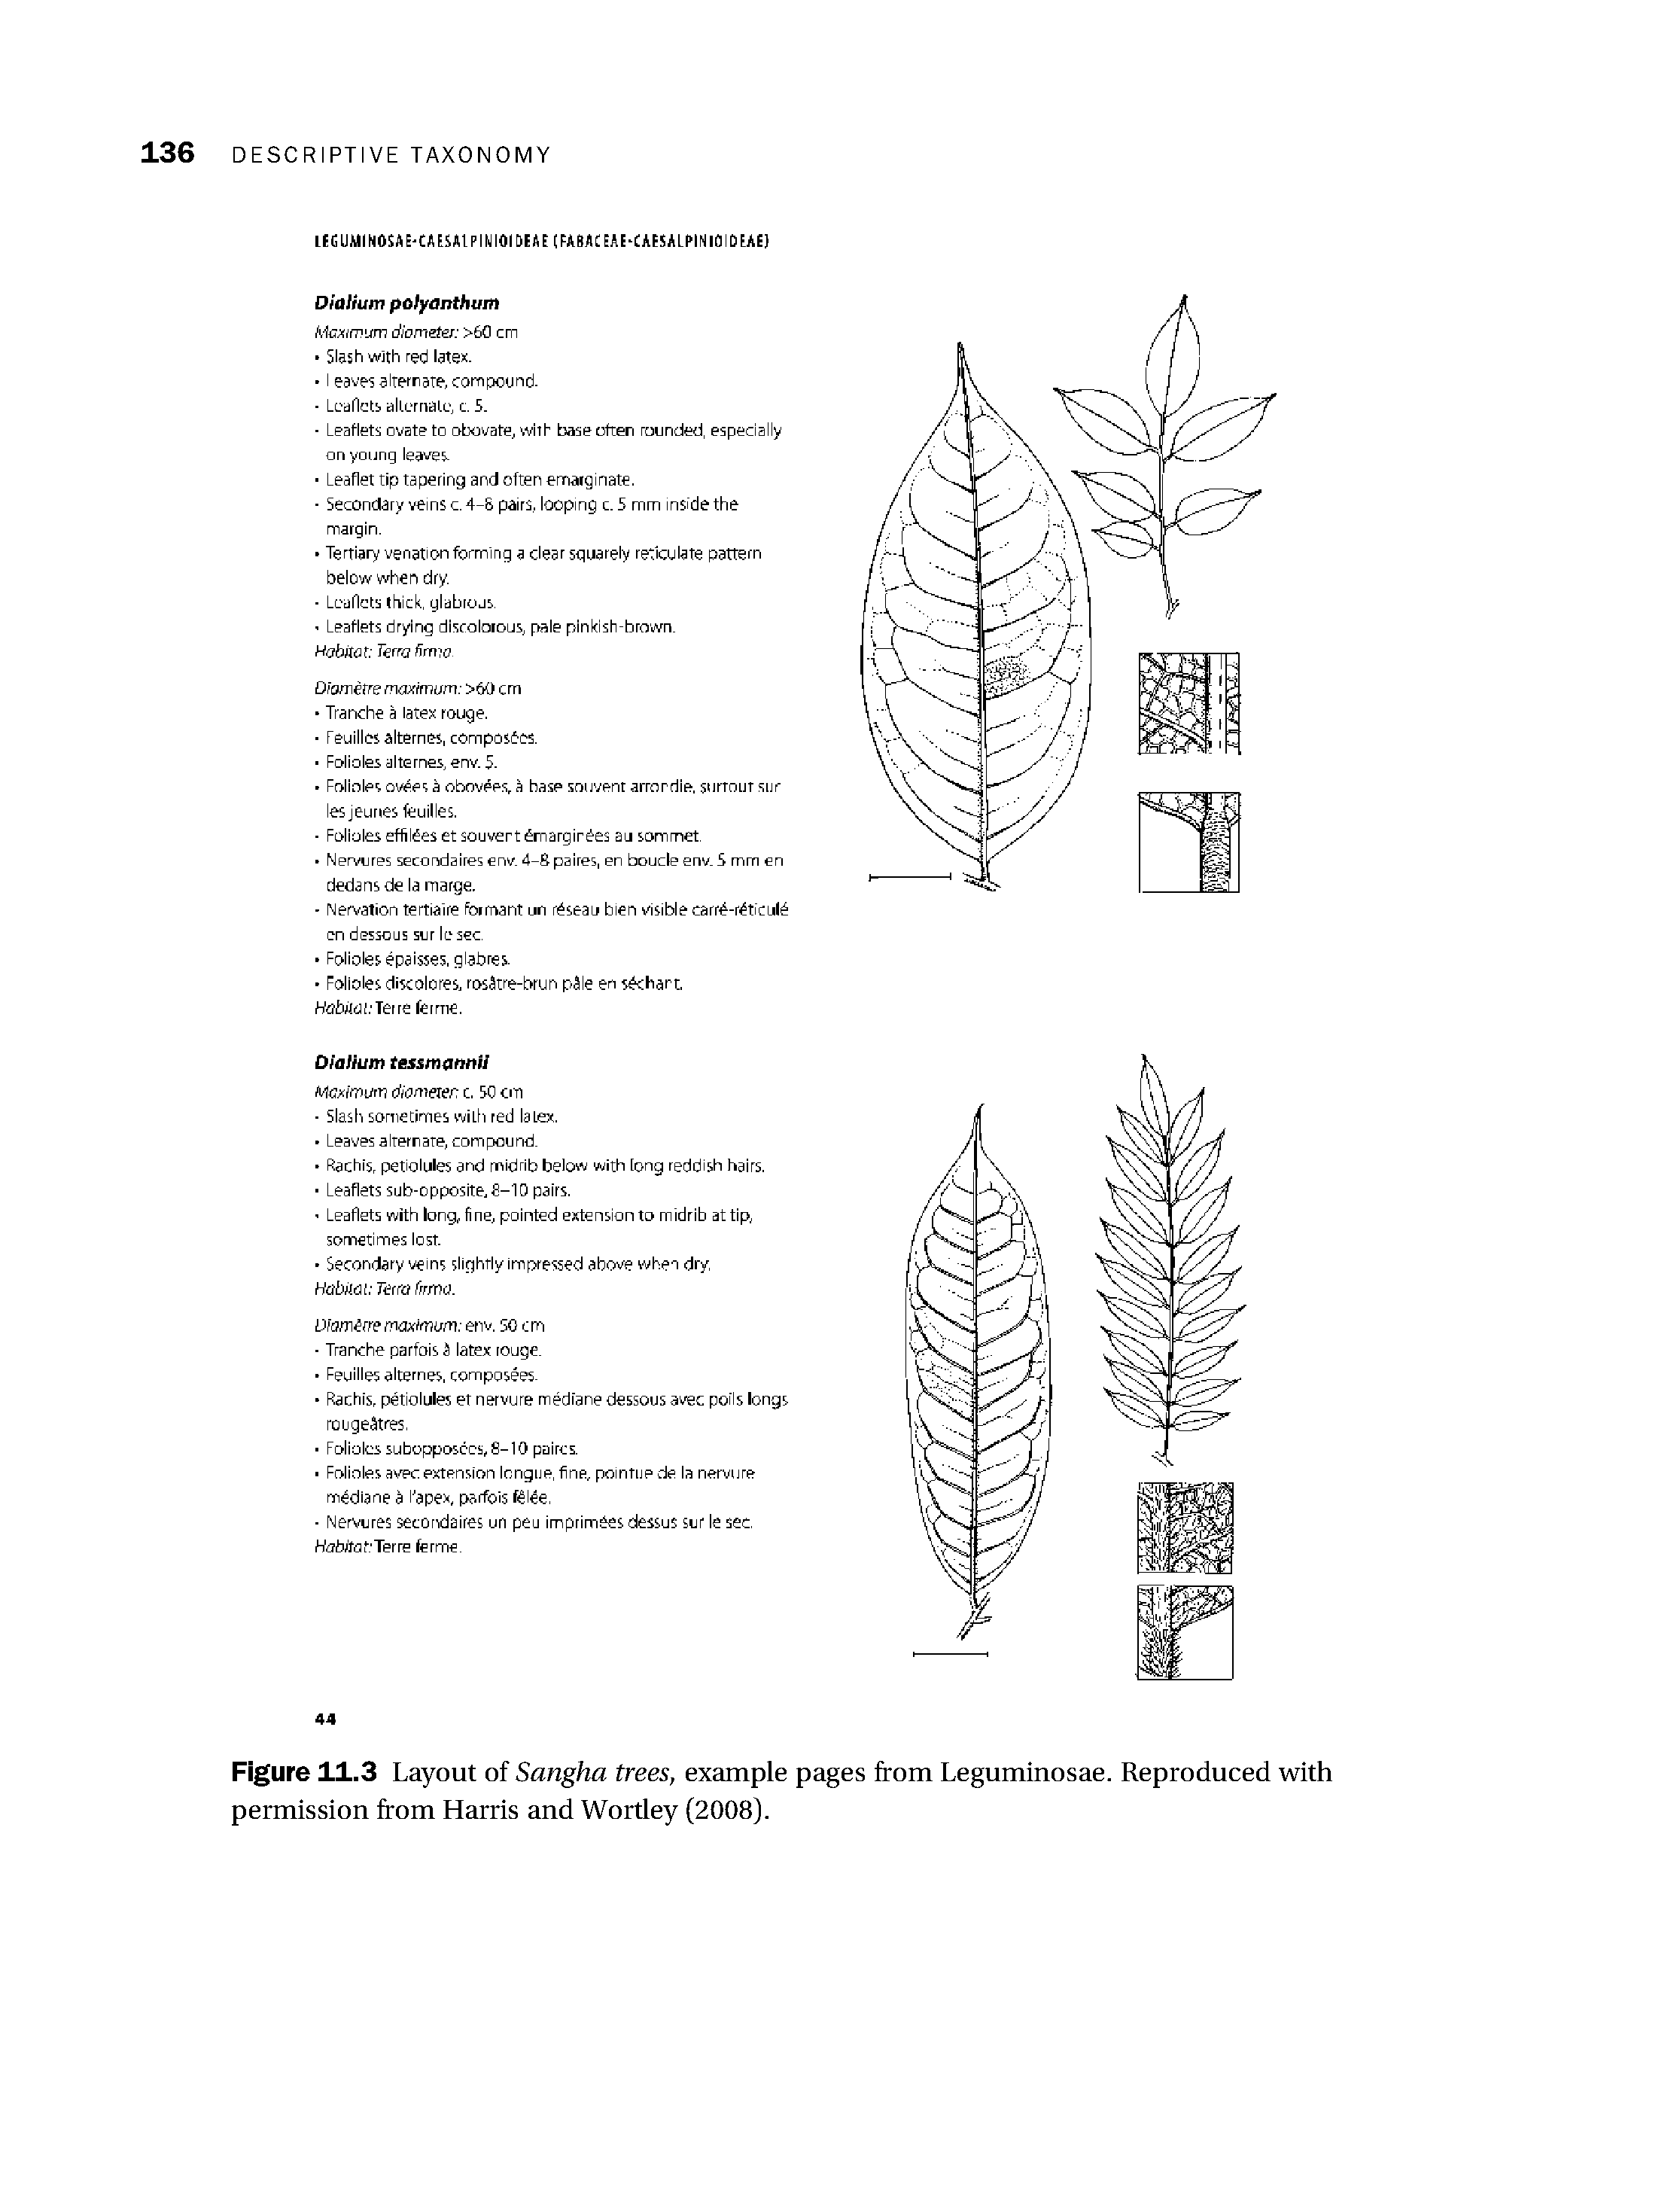 Figure 11.3 Layout of Sangha trees, example pages from Leguminosae. Reproduced with permission from Harris and Wortley (2008).